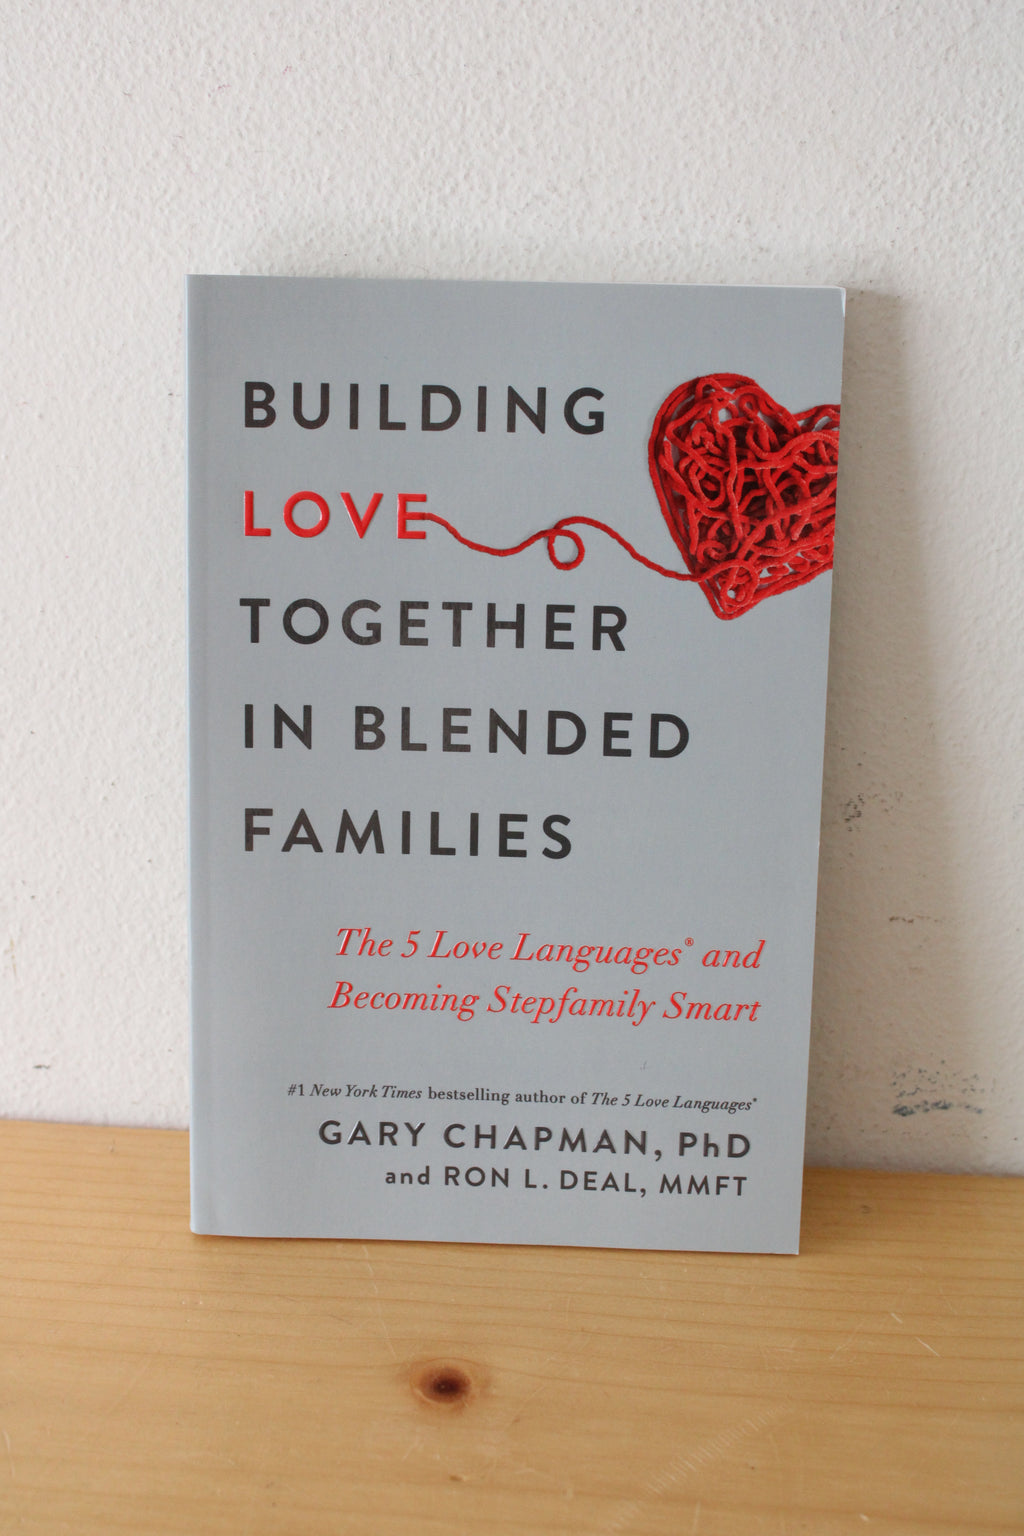 Building Love Together In Blended Families: The 5 Love Languages And Becoming Stepfamily Smart. By Gary Chapman, PhD